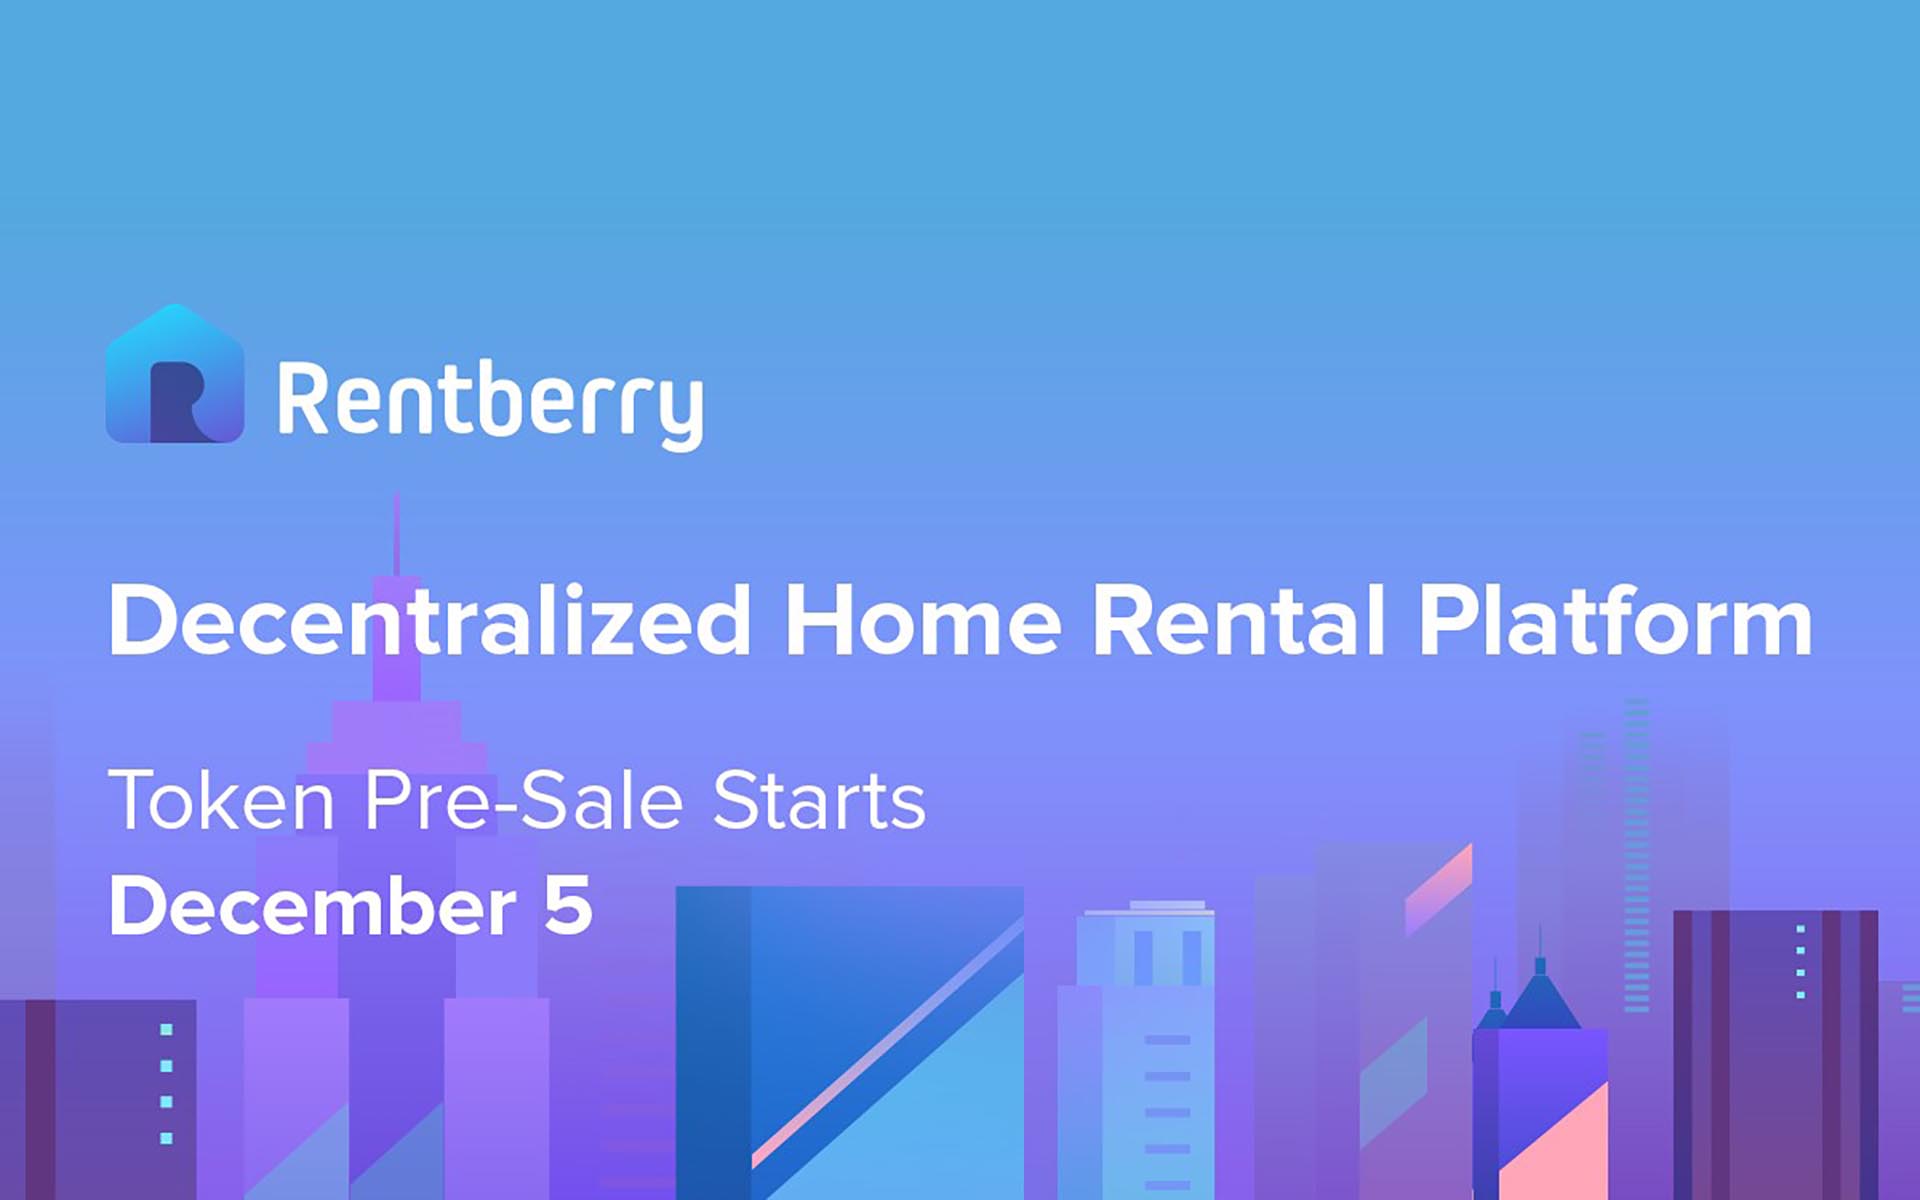 Rentberry - the Long-Awaited Innovation in the Long-Term Home Rental Industry